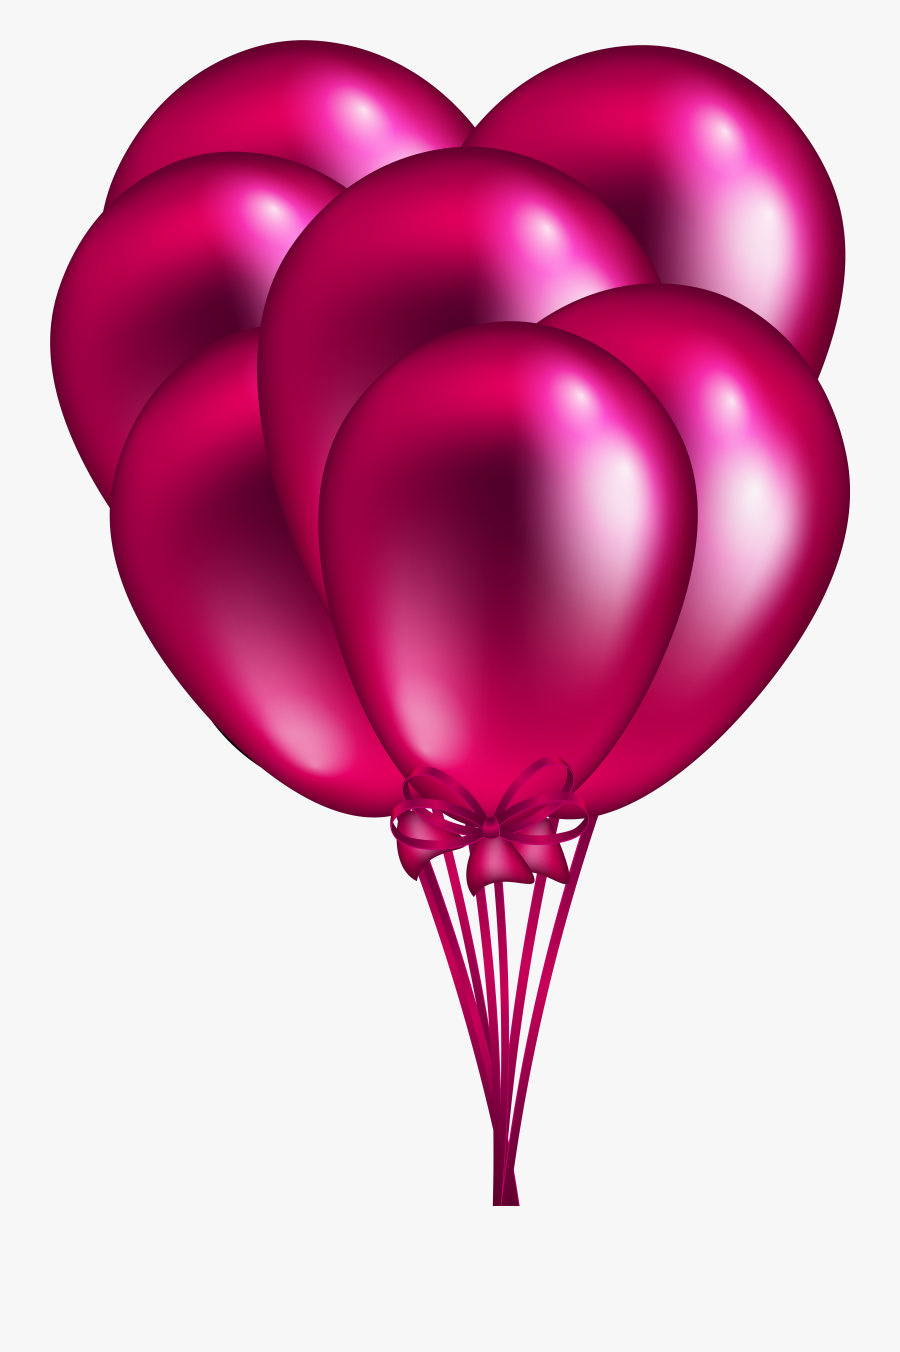 Pink Balloon Bunch Png Clip Art - Red Balloons Transparent Background, Transparent Clipart